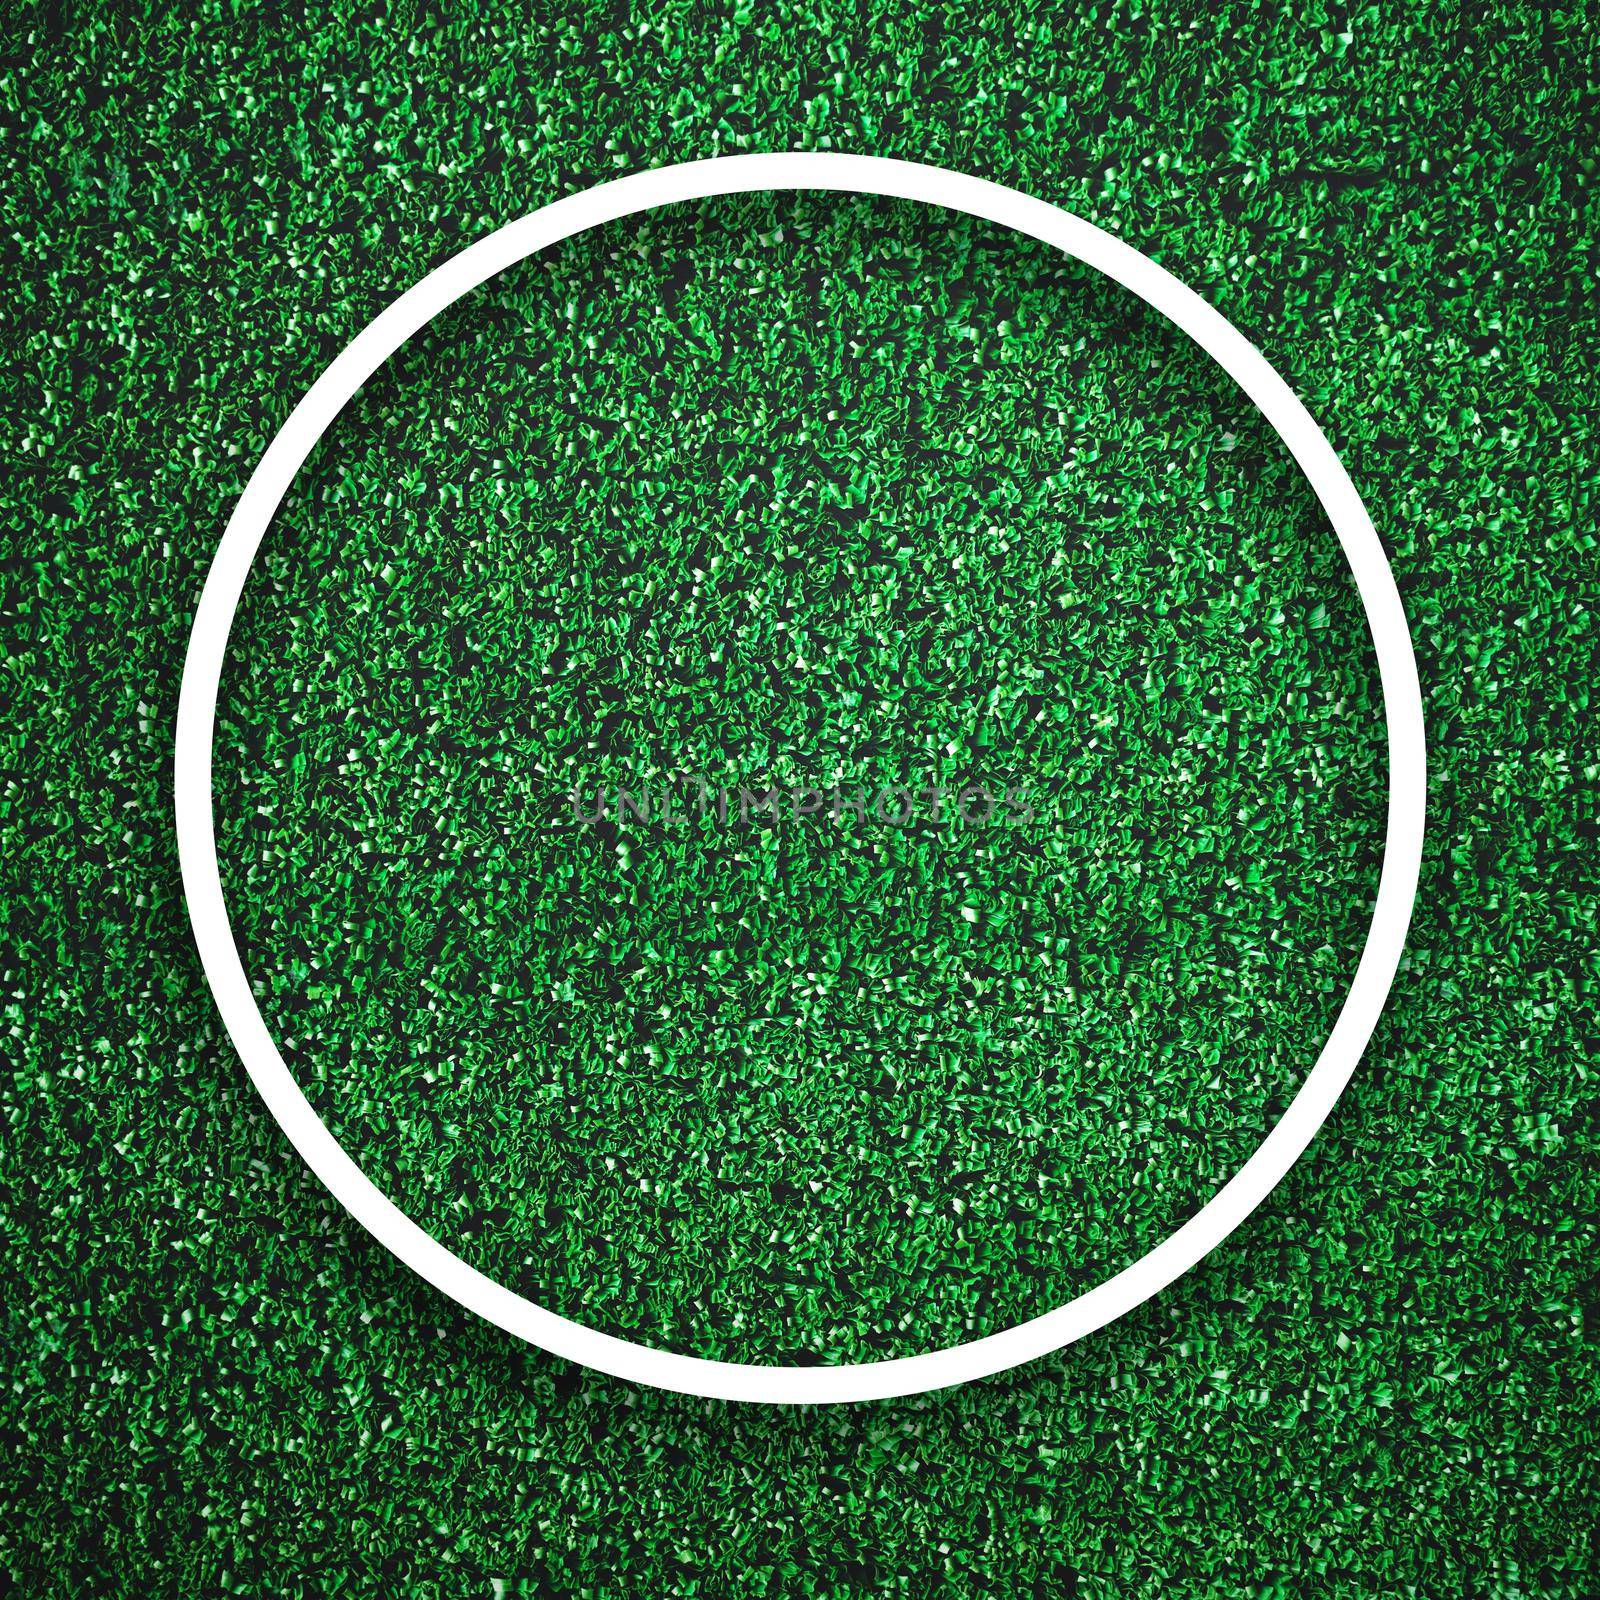 Circular white frame edge on green grass with shadow background. Decoration background element concept. Copy space for text insert in filled in black space. by MiniStocker